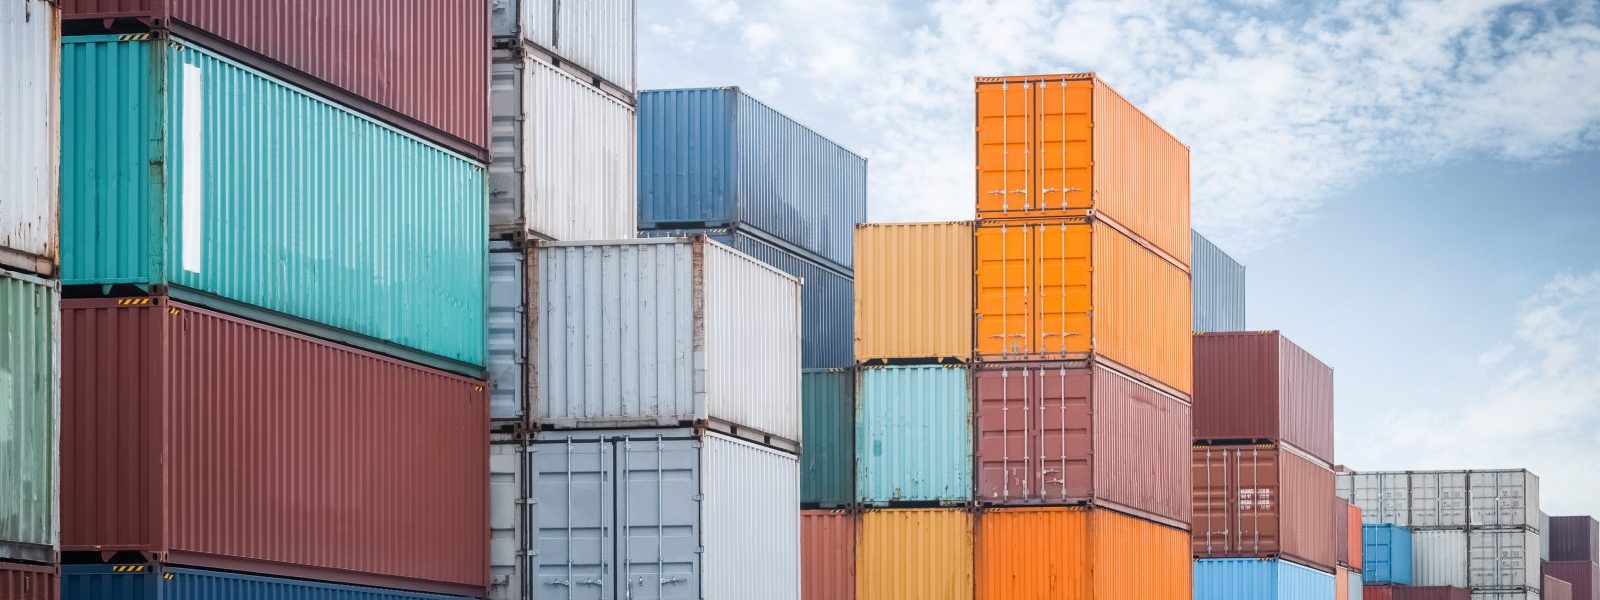 Shipping containers photograph